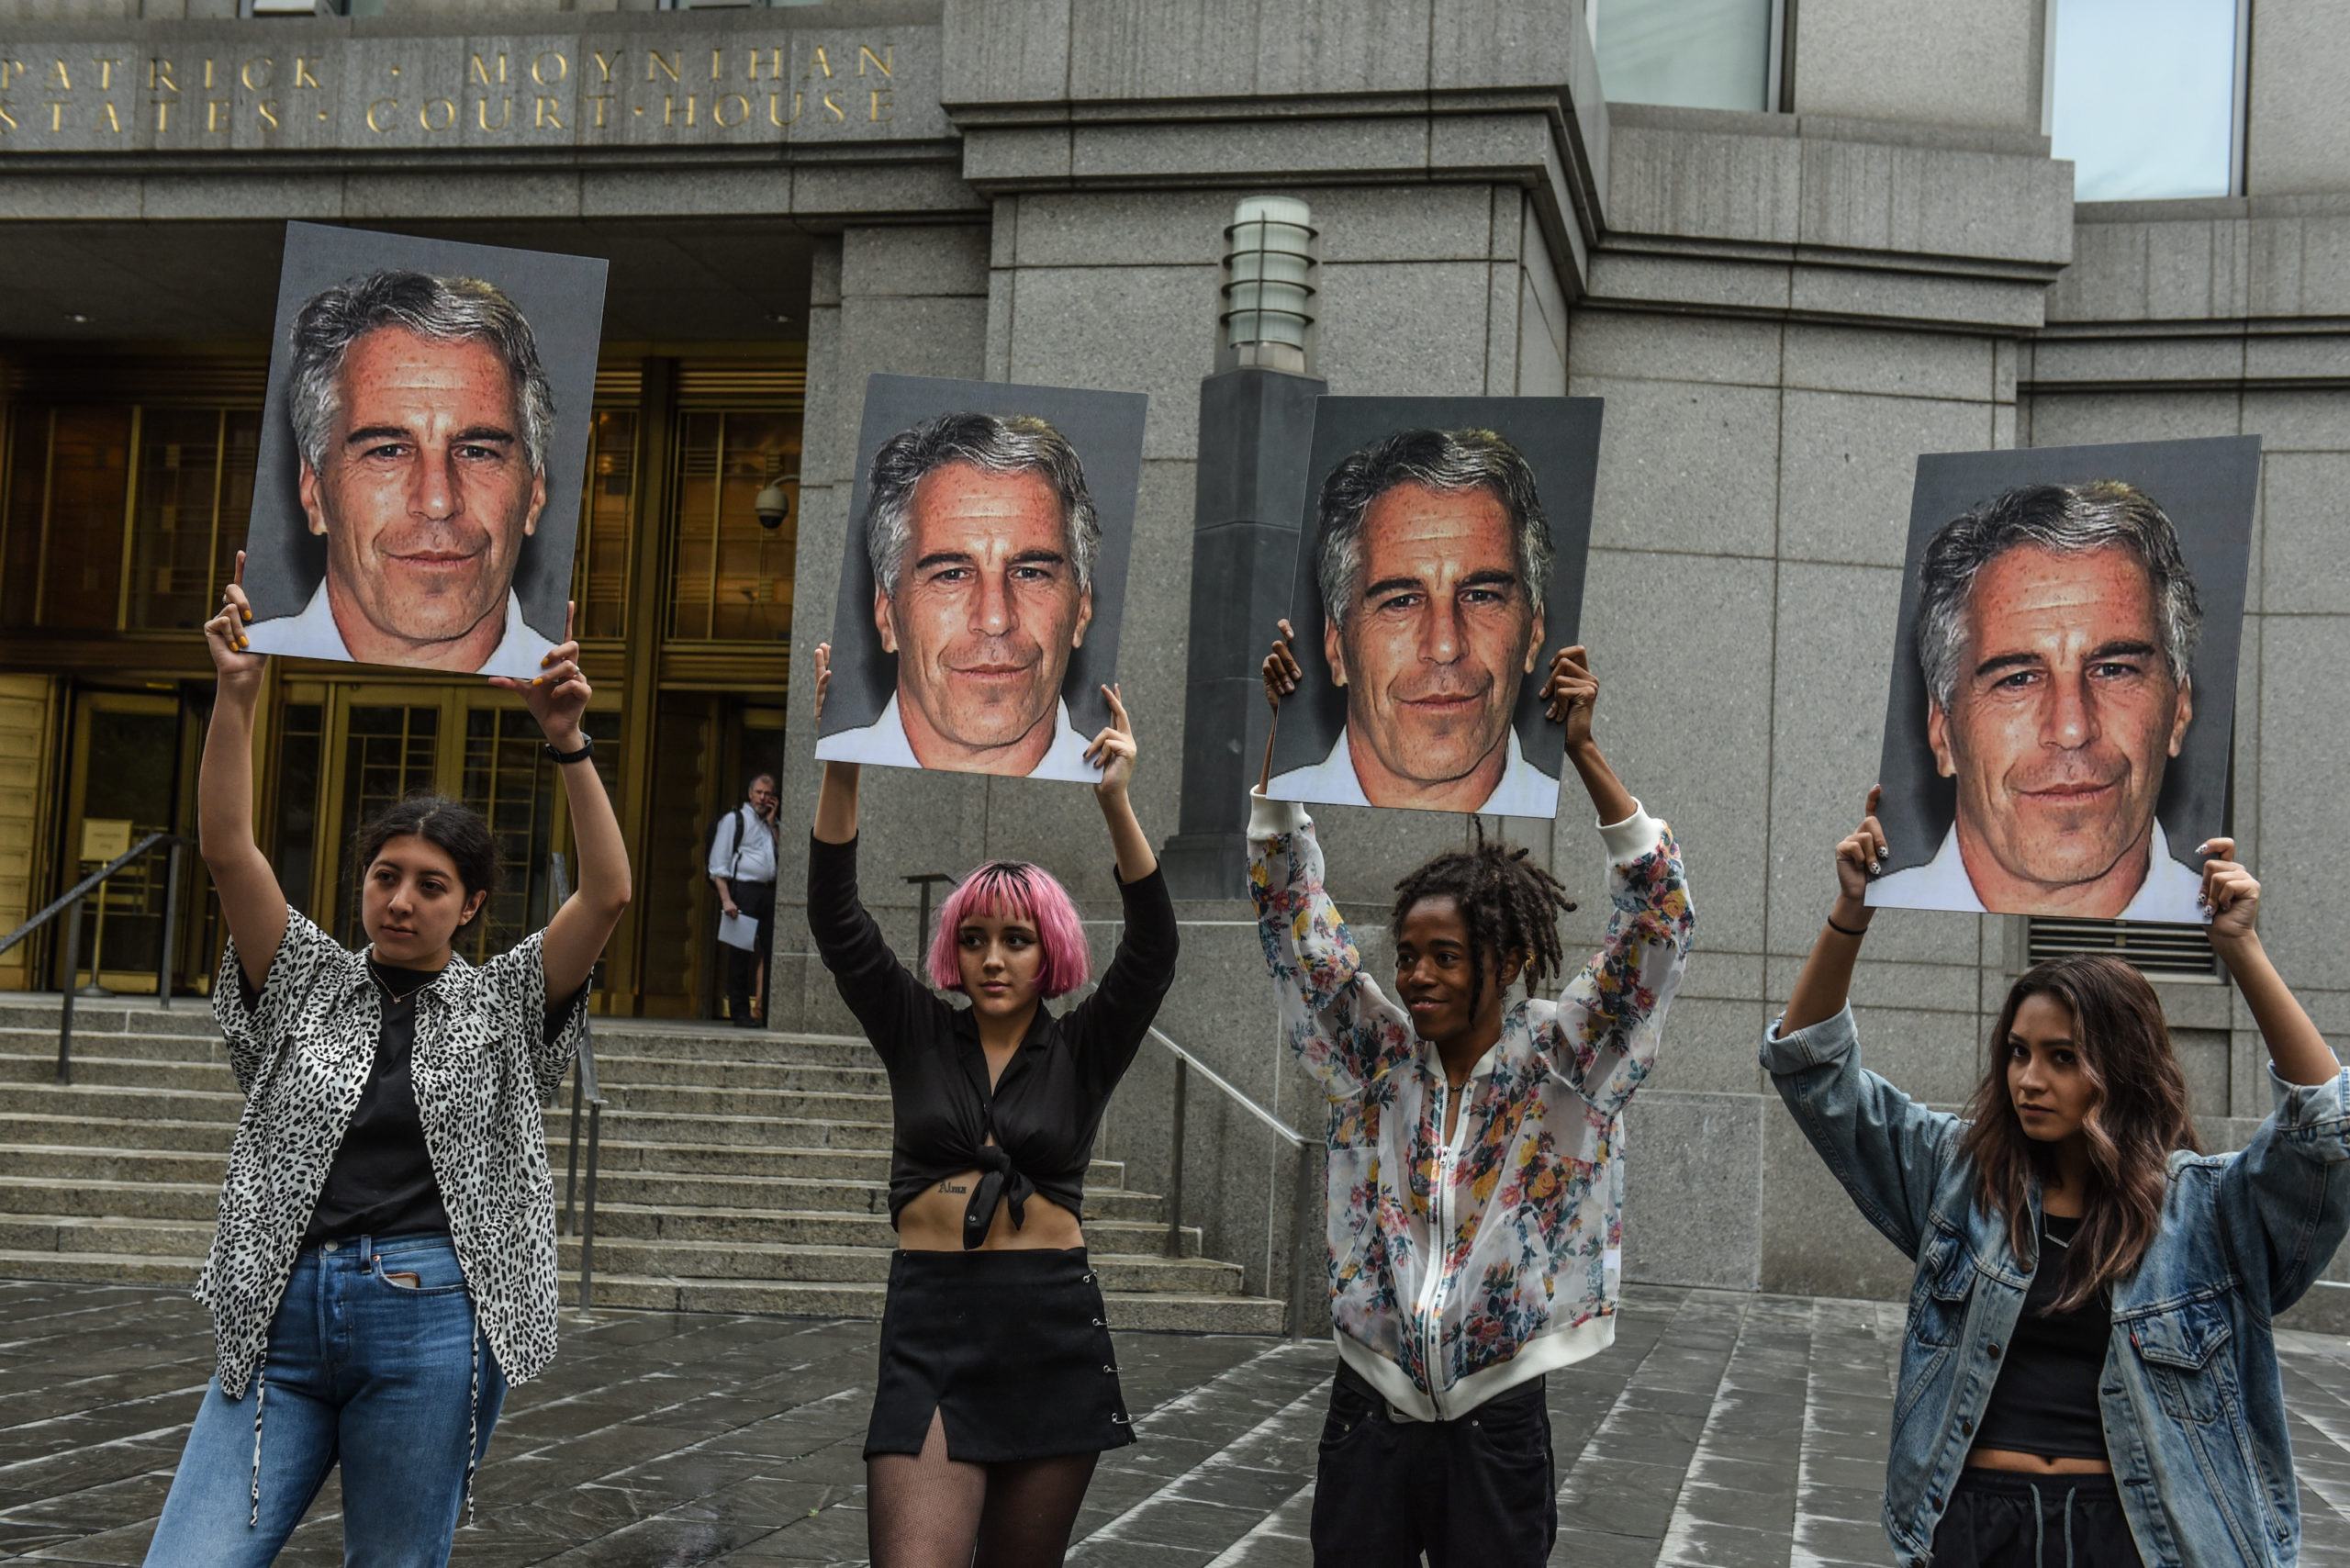 NEW YORK, NY - JULY 08: A protest group called "Hot Mess" hold up signs of Jeffrey Epstein in front of the Federal courthouse on July 8, 2019 in New York City. According to reports, Epstein will be charged with one count of sex trafficking of minors and one count of conspiracy to engage in sex trafficking of minors. (Photo by Stephanie Keith/Getty Images)